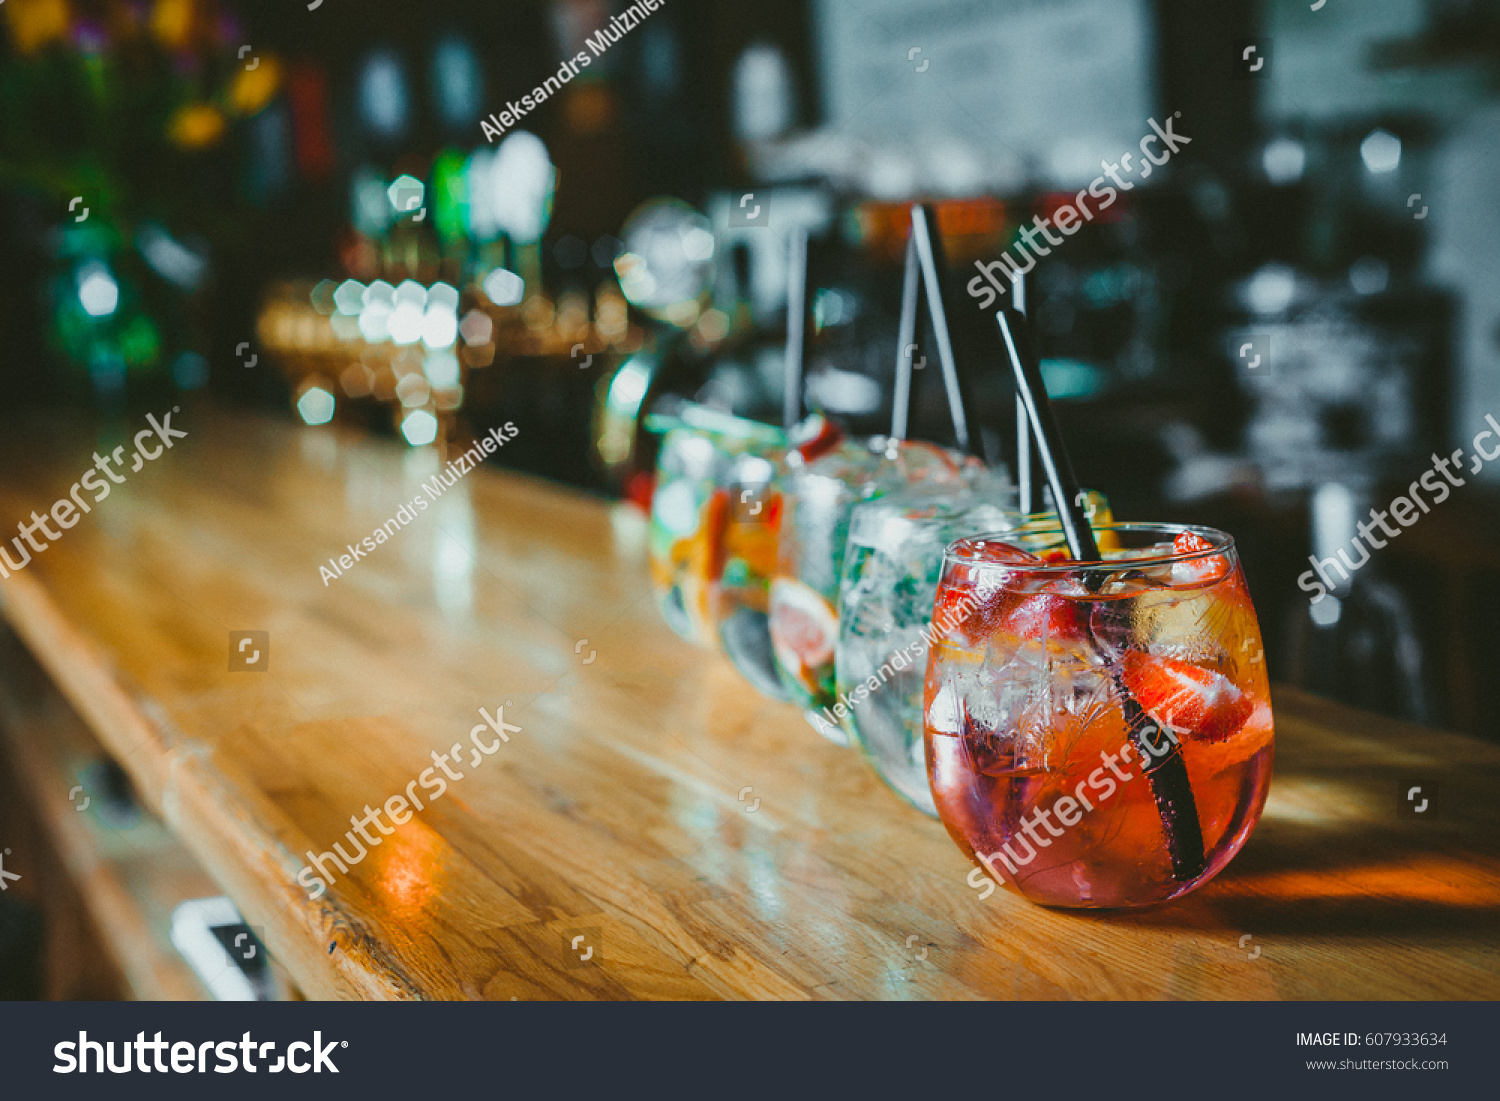 Alcoholic cocktail row on bar table, colorful party drinks  #607933634